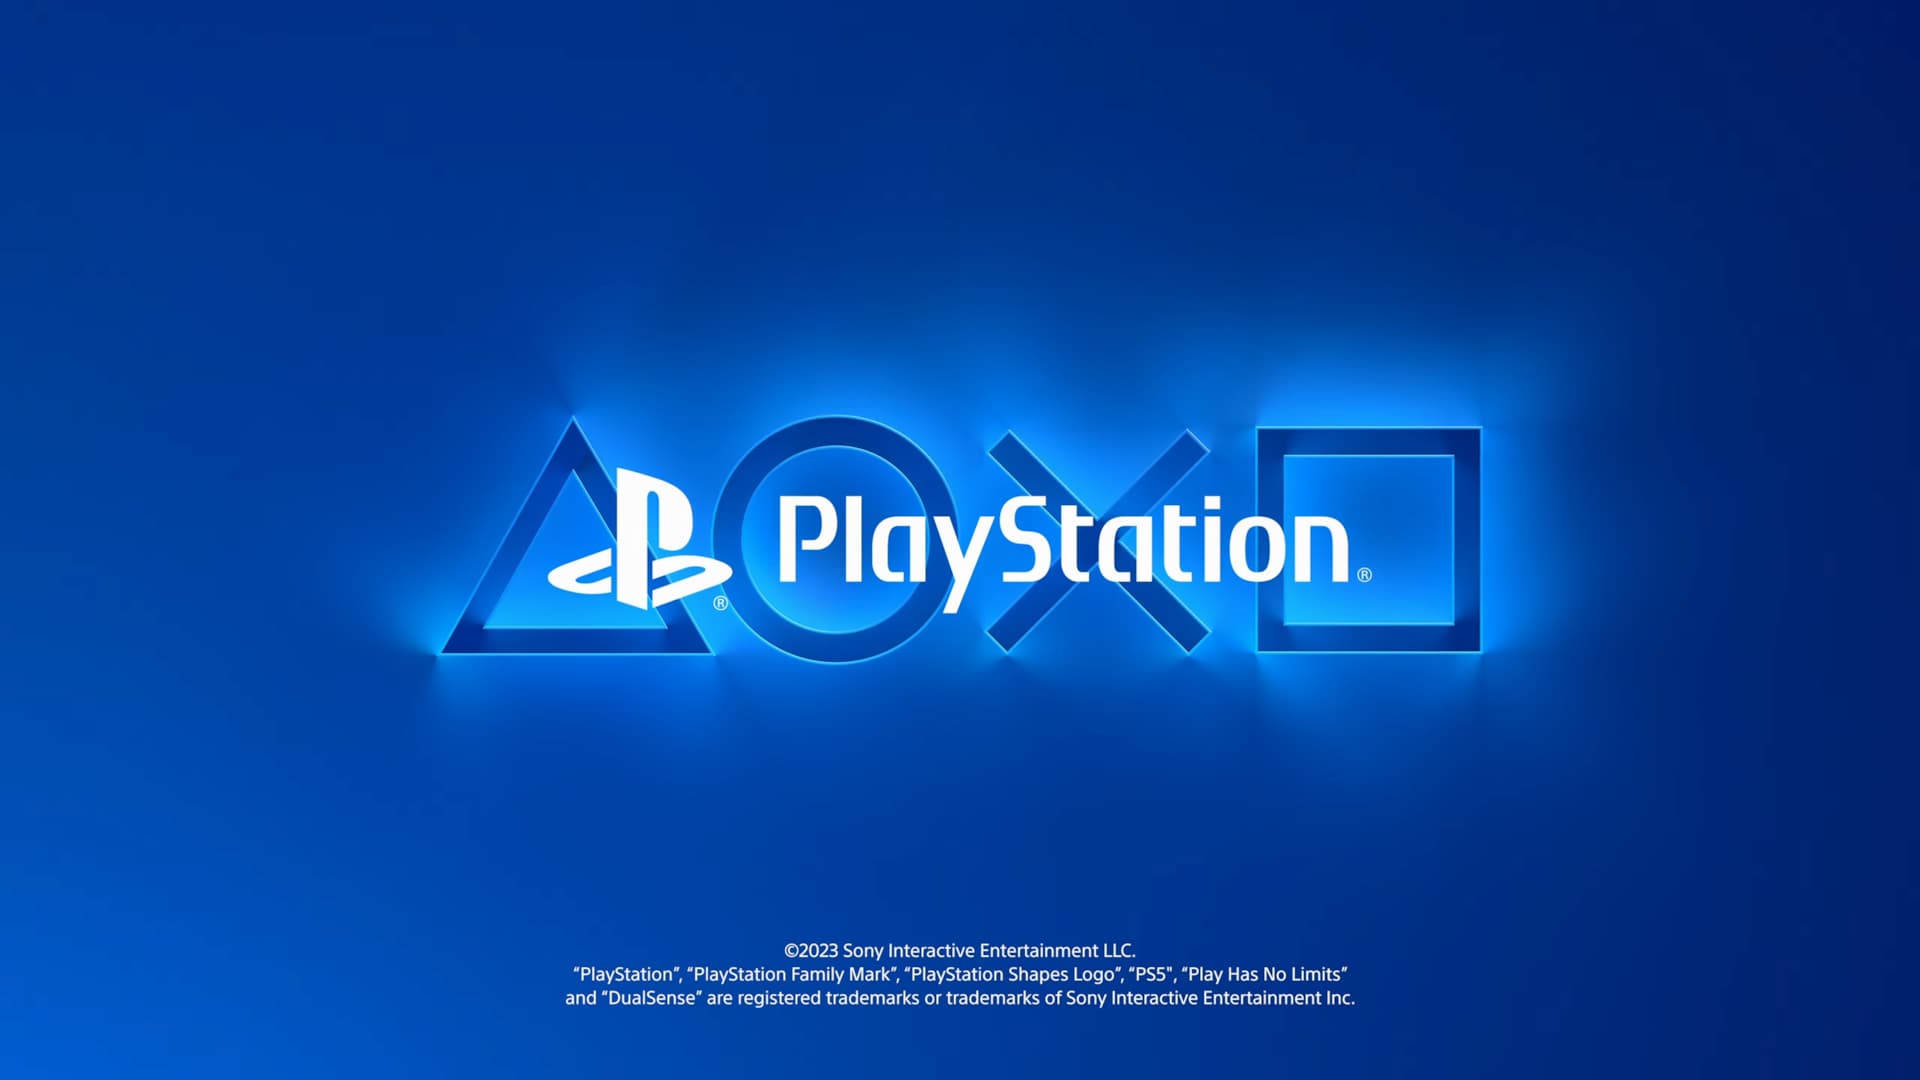 State of PlayStation - PlayStation PS5